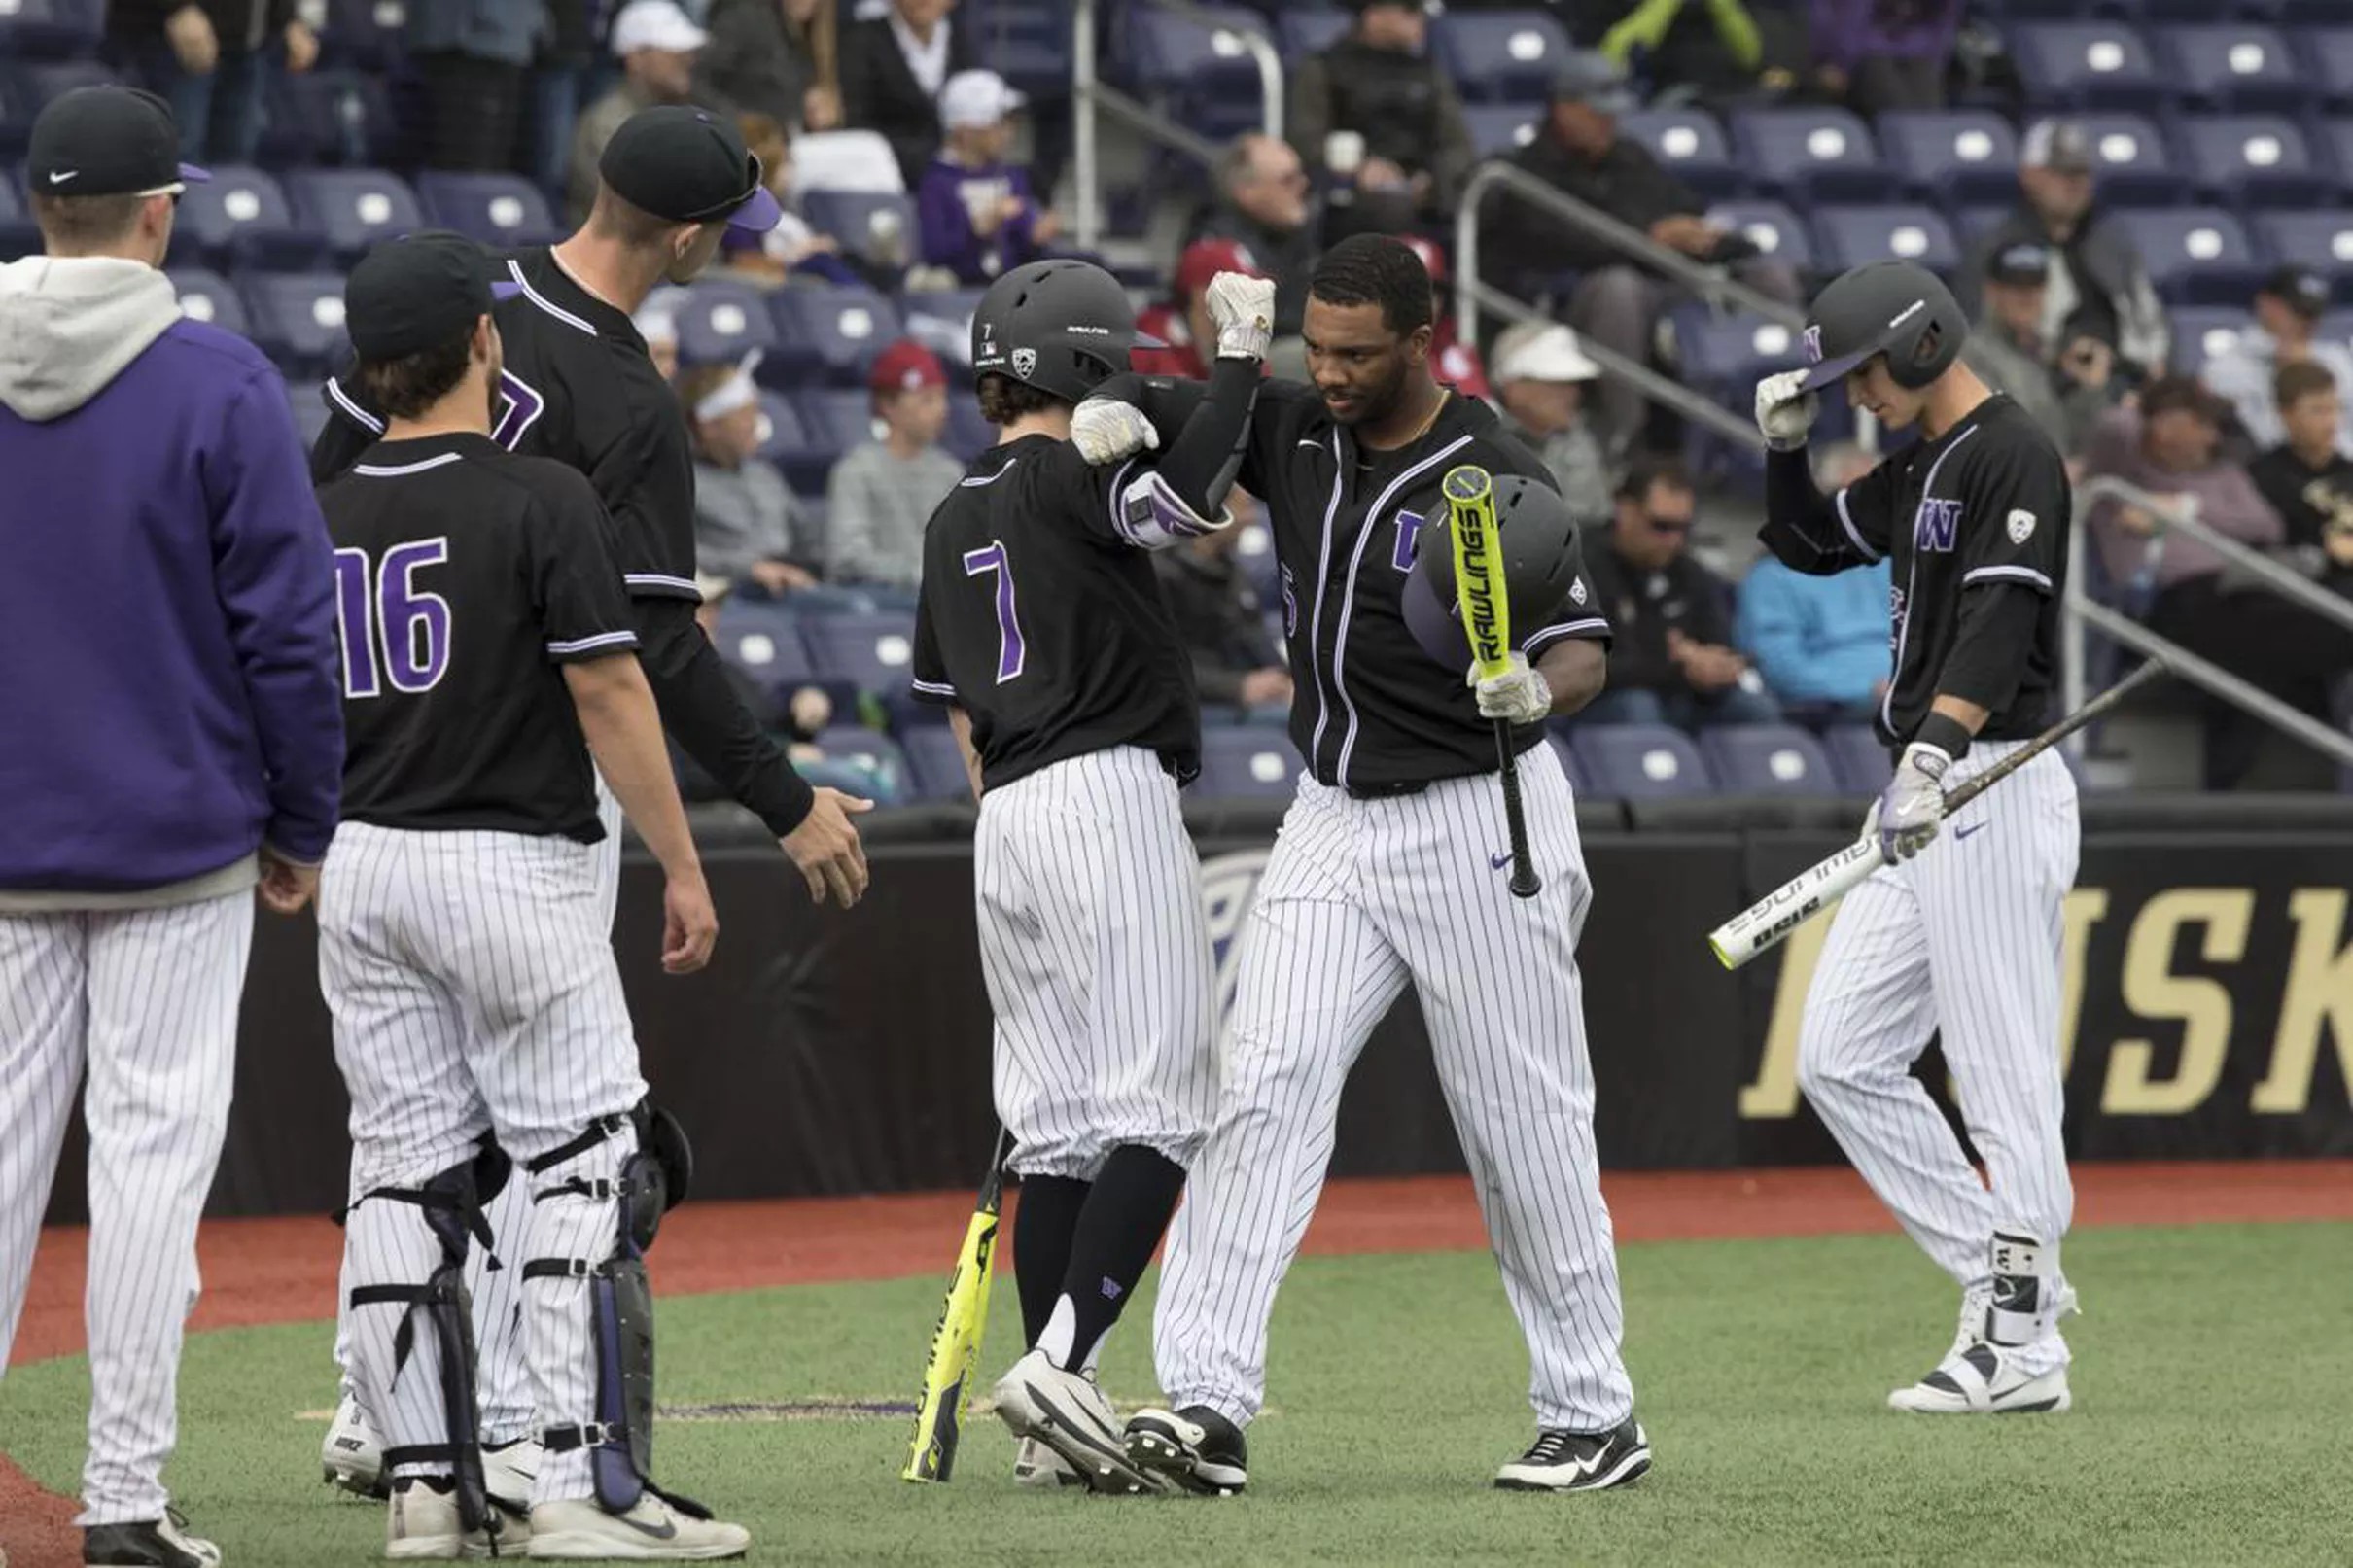 Friday Dots: UW Baseball competes in school’s first ever Super Regional this morning